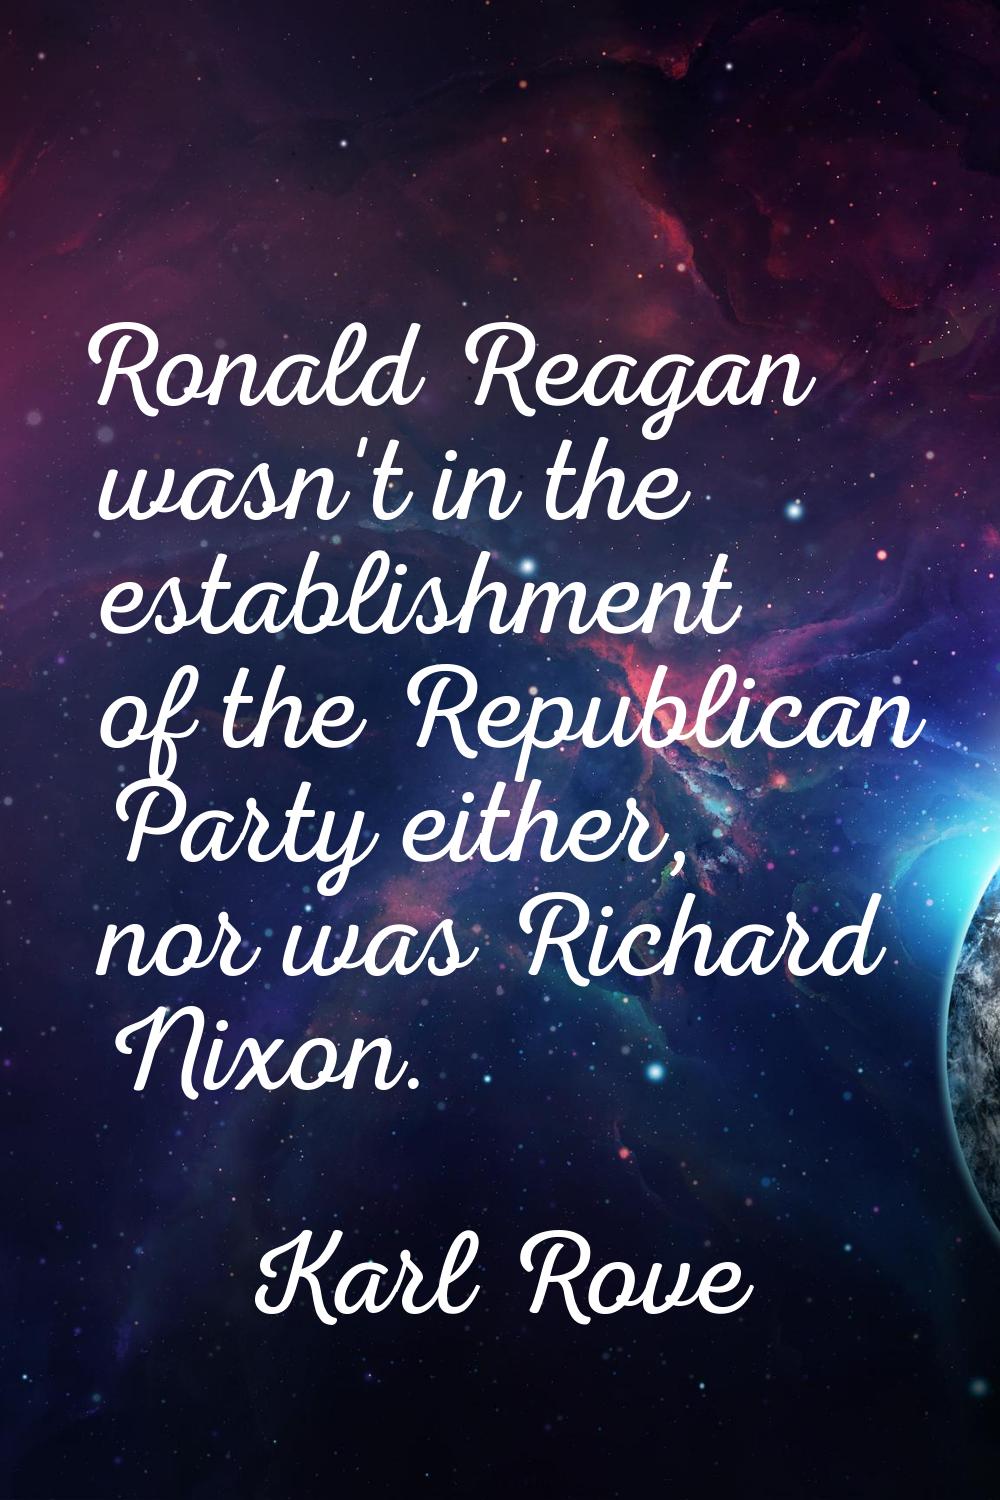 Ronald Reagan wasn't in the establishment of the Republican Party either, nor was Richard Nixon.